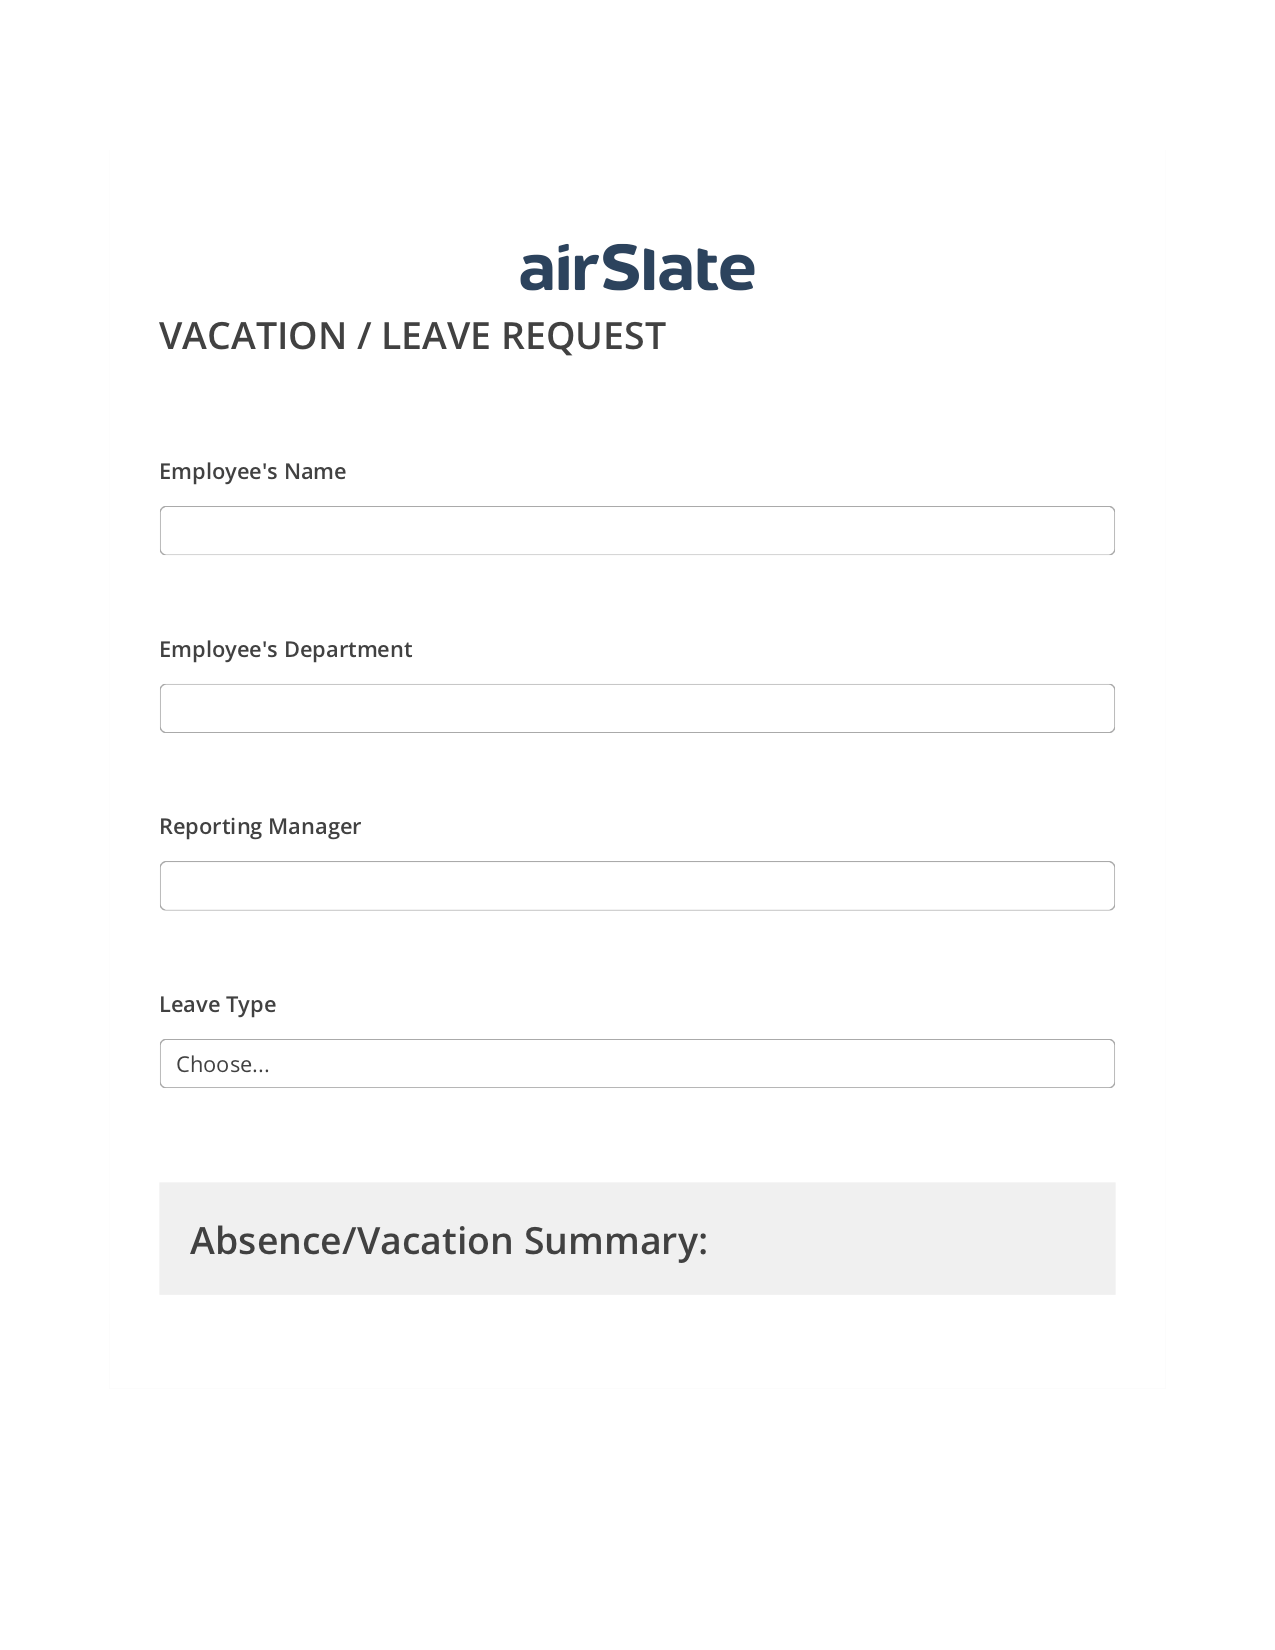 Multirole Vacation/Leave Request Workflow System Bot - Slack Two-Way Binding Bot, Lock the Slate Bot, Export to Smartsheet